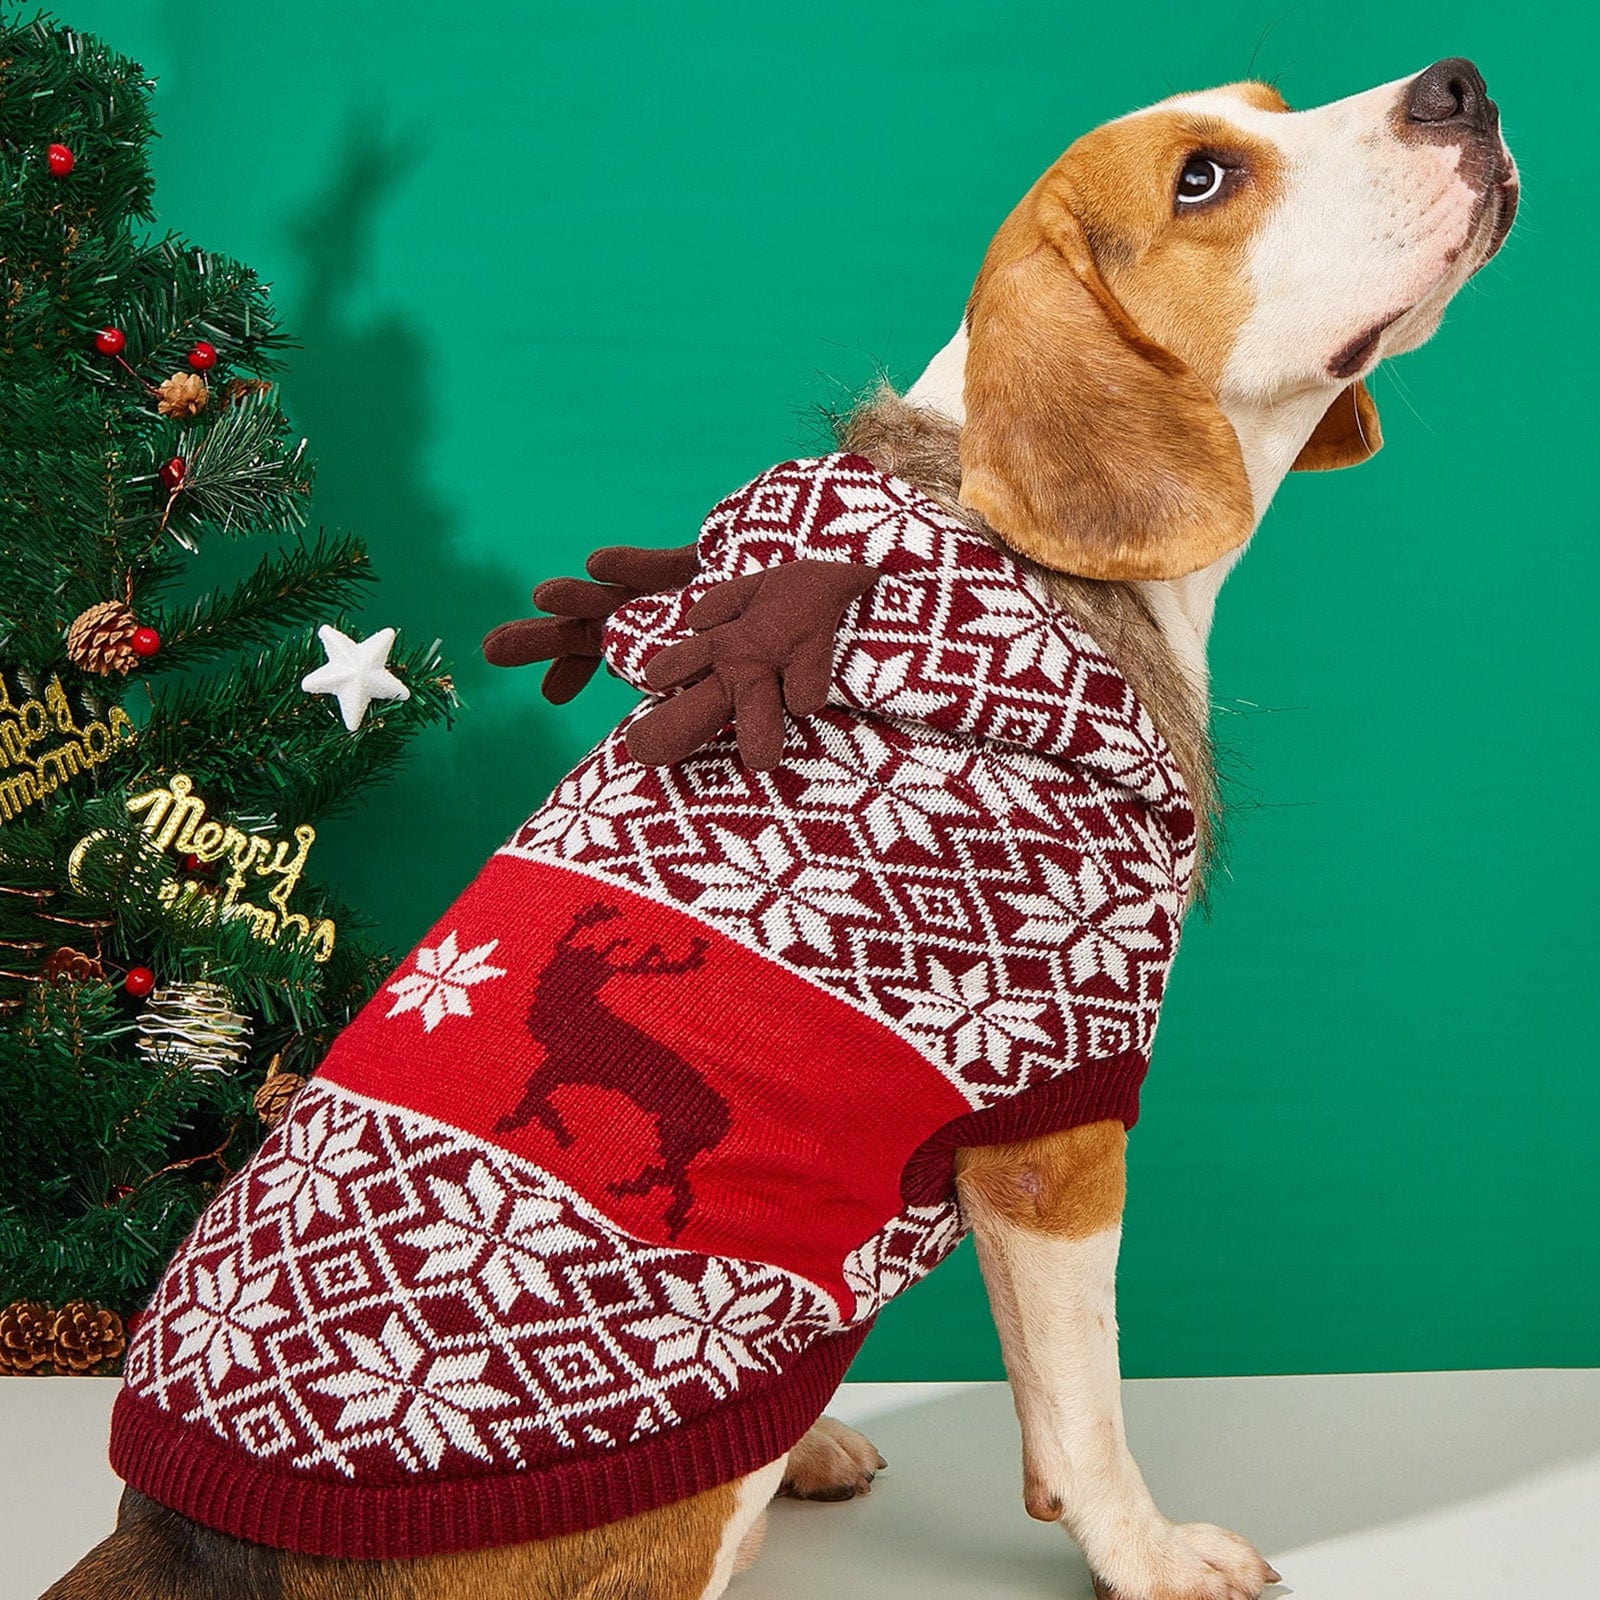 Knit Sweater For Dog – Cosplay As Reindeer